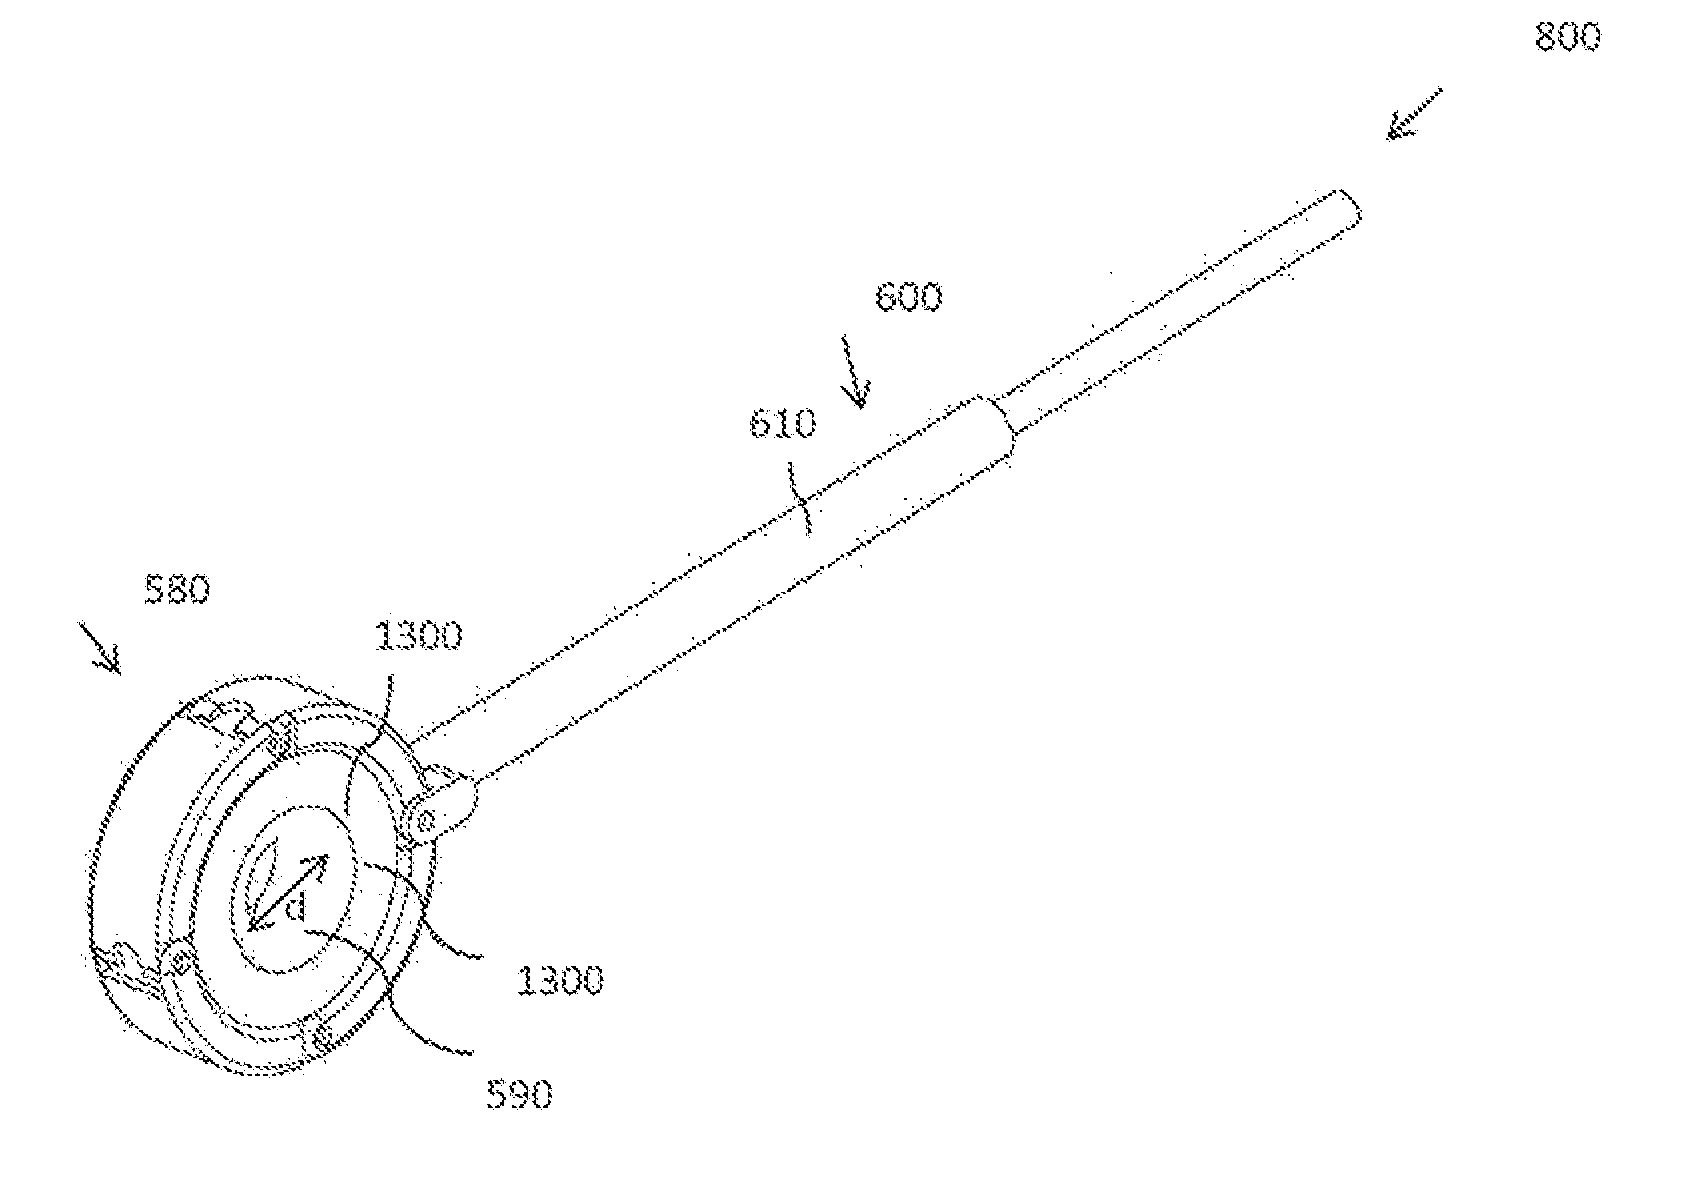 Methods and devices for occluding blood flow to an organ